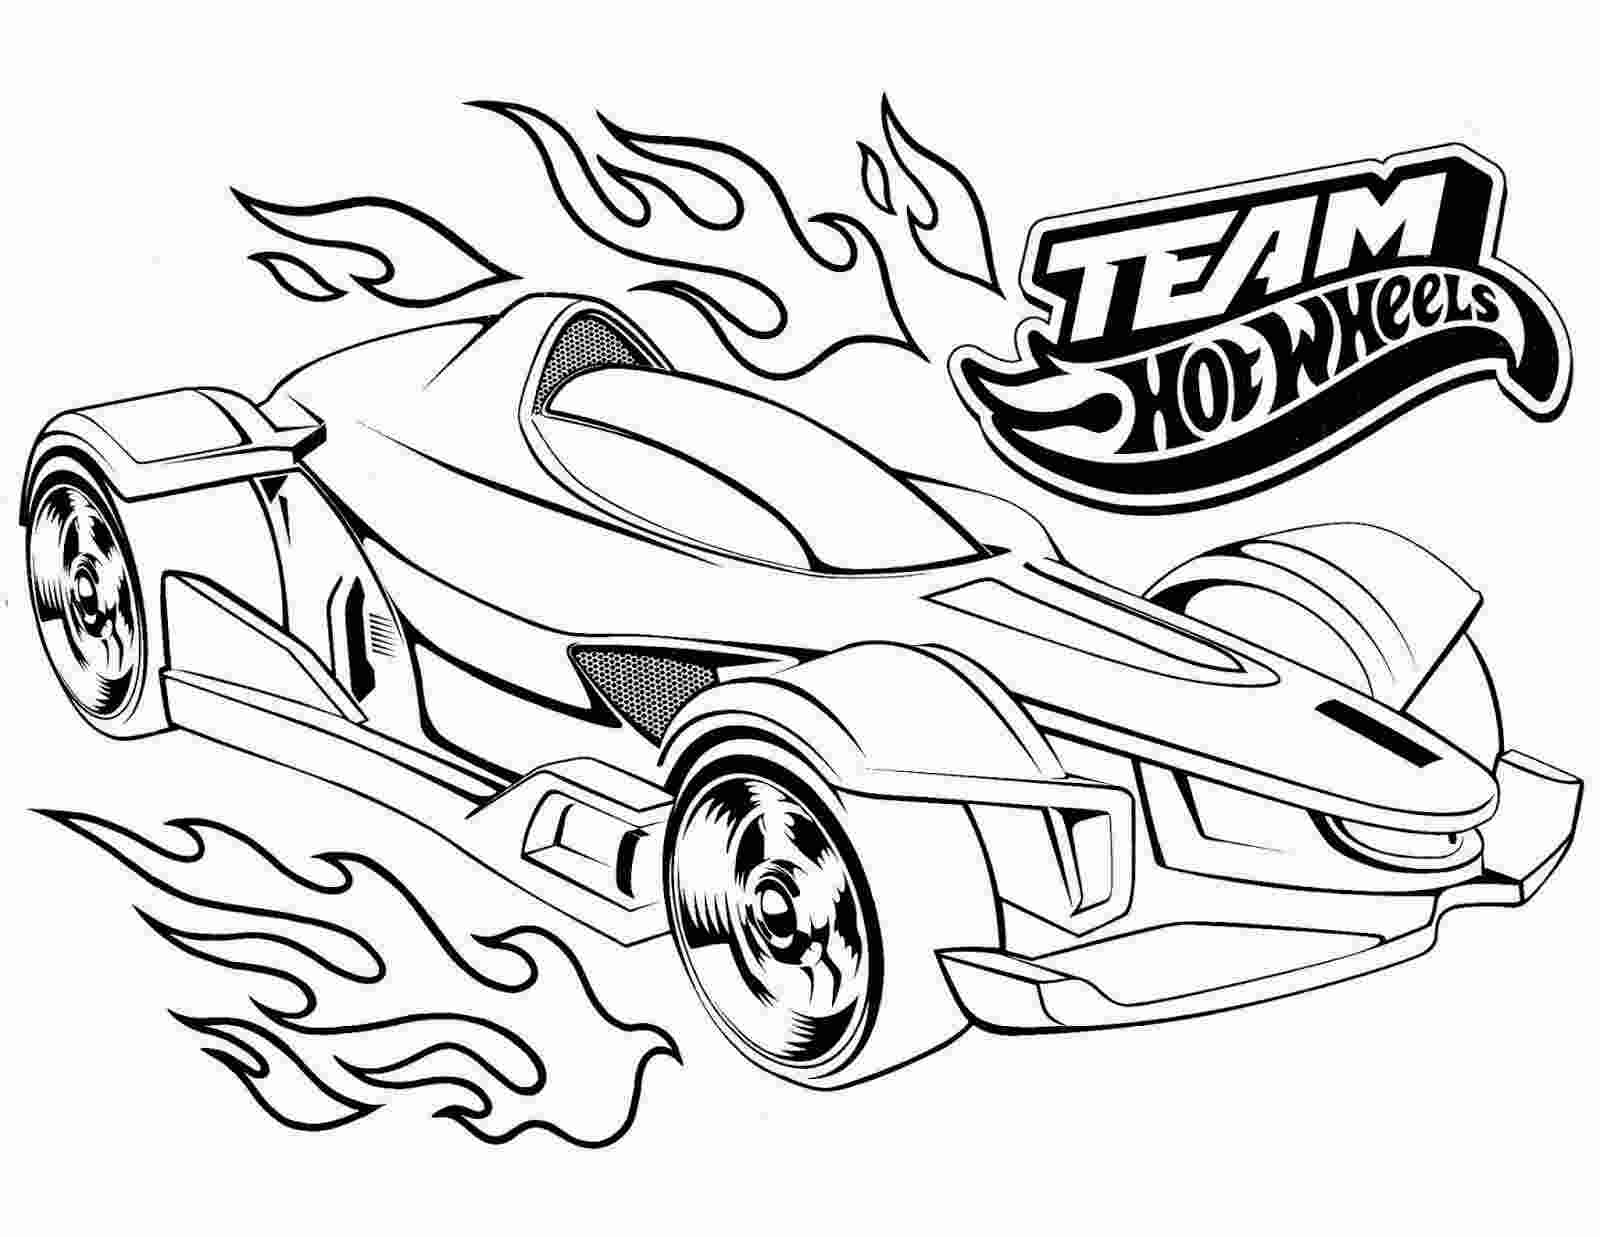 Team Hot Wheels sport car with flames Coloring Page